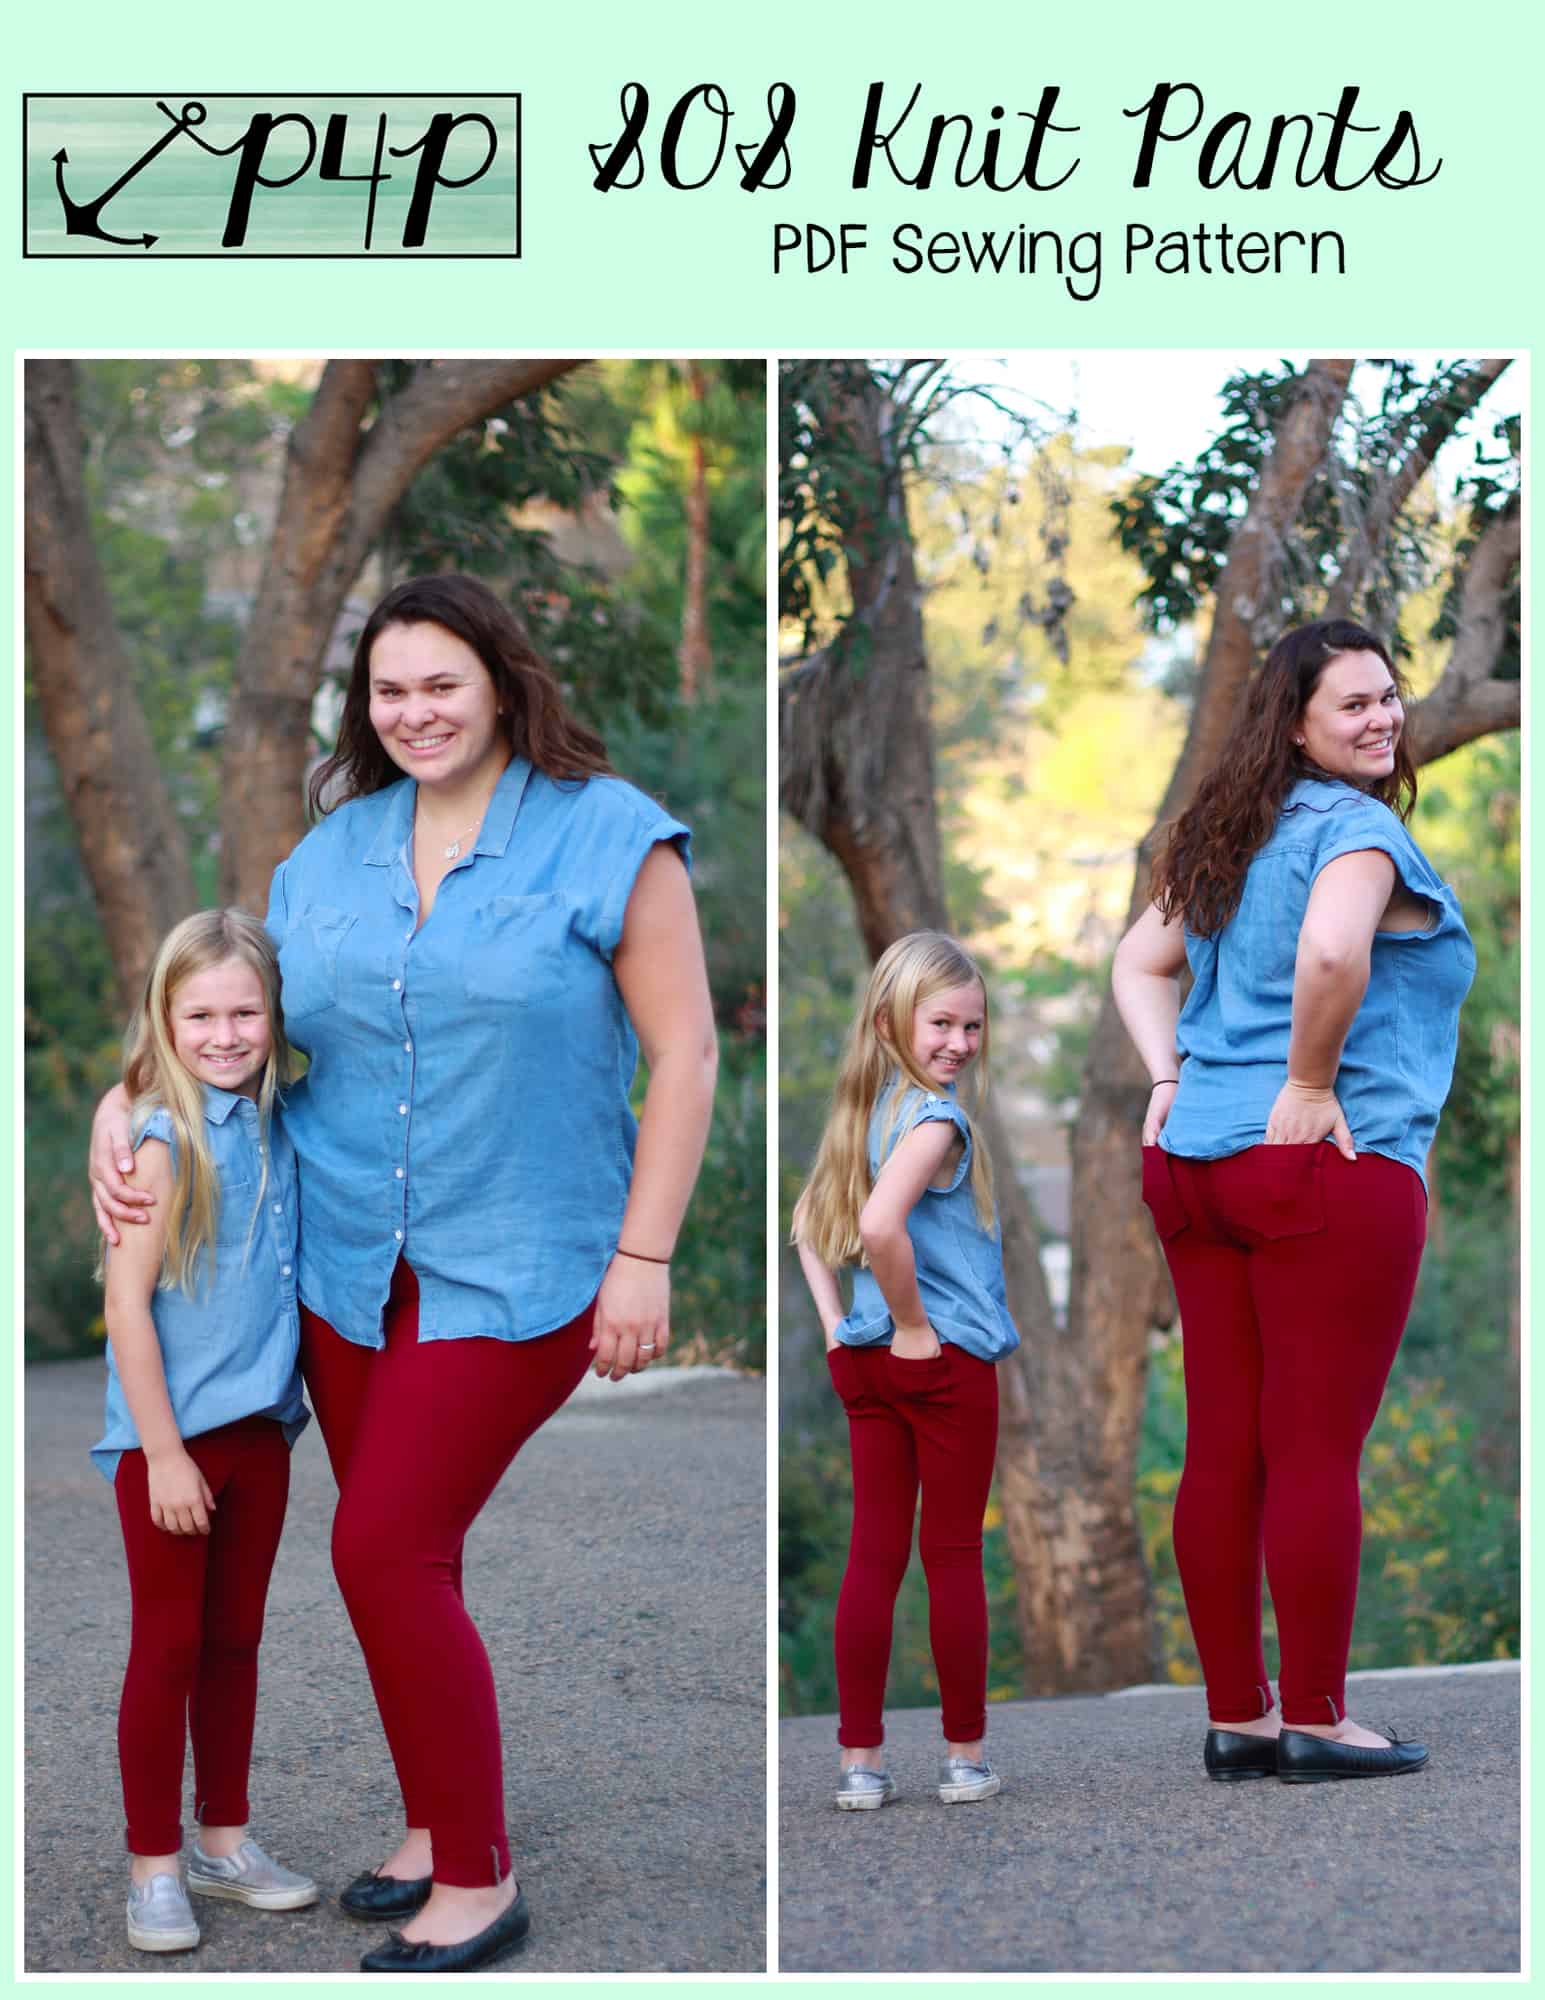 Free Women's Moto Hack for SOS Knit Pants - Patterns for Pirates